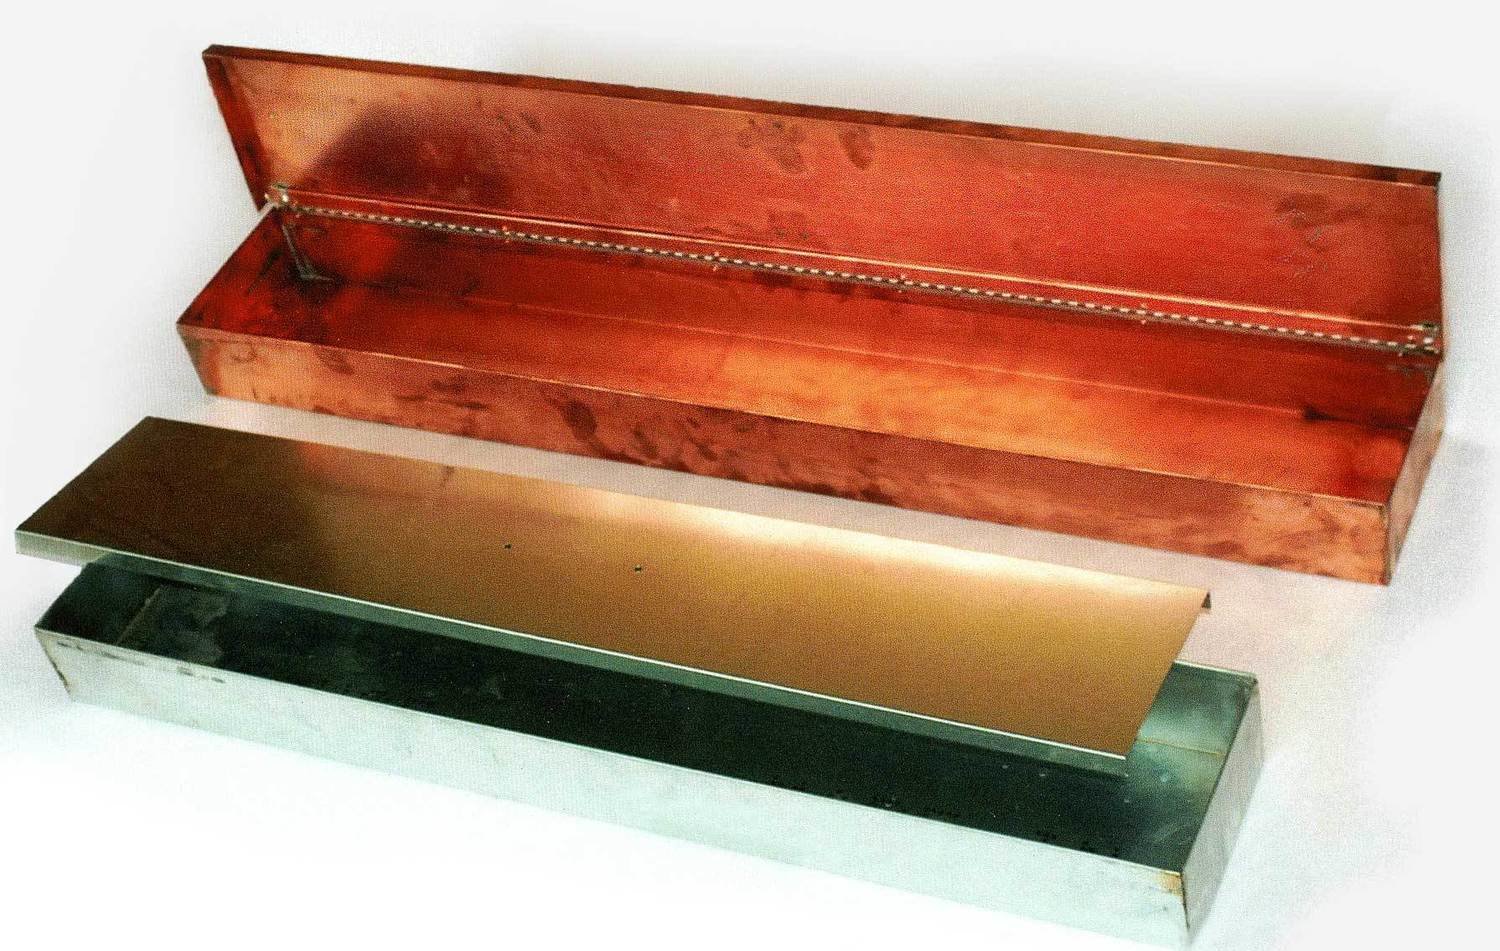 48" Copper Hot Water Tray